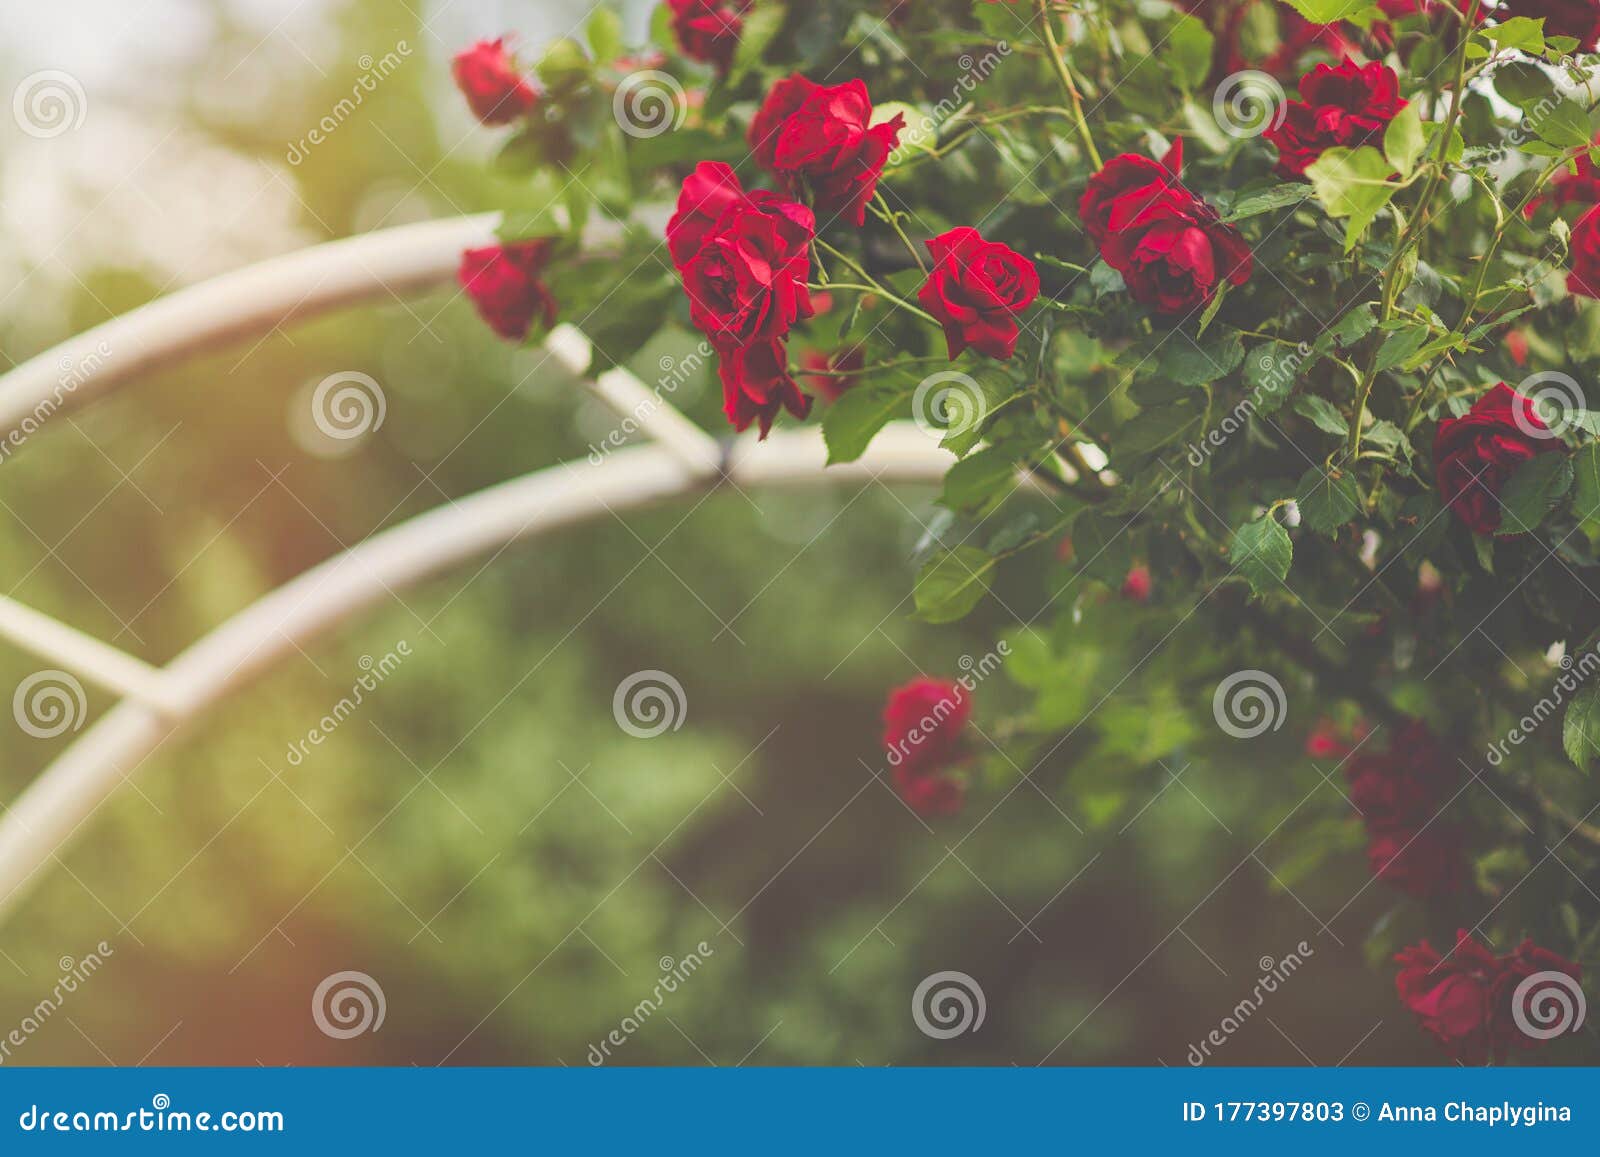 Red Climbing Roses On Arch Blooming In Garden Stock Image Image Of Copy Closeup 177397803